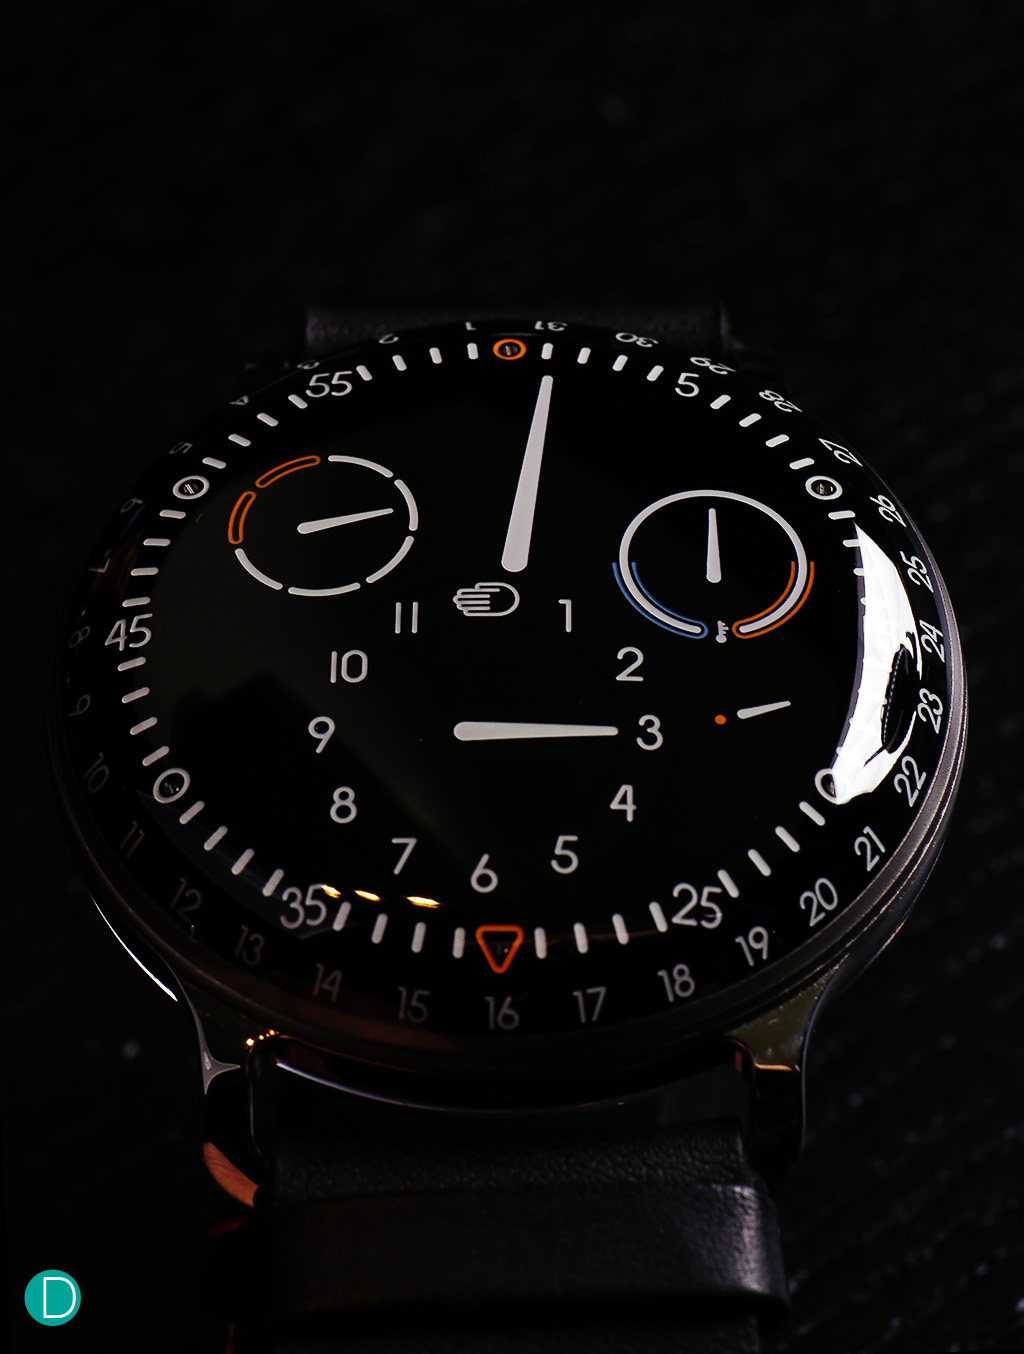 Ressence New Type 3. The hours are indicated by the subdial at 6 o'clock. Below that, shown by a small orange triangle is the date. The minutes by the large central hand. At 10 o'clock is the Day indicator, weekends marked in orange. The subdial at 2 o'clock is the new oil temperature indicator. Below that is the seconds hand.